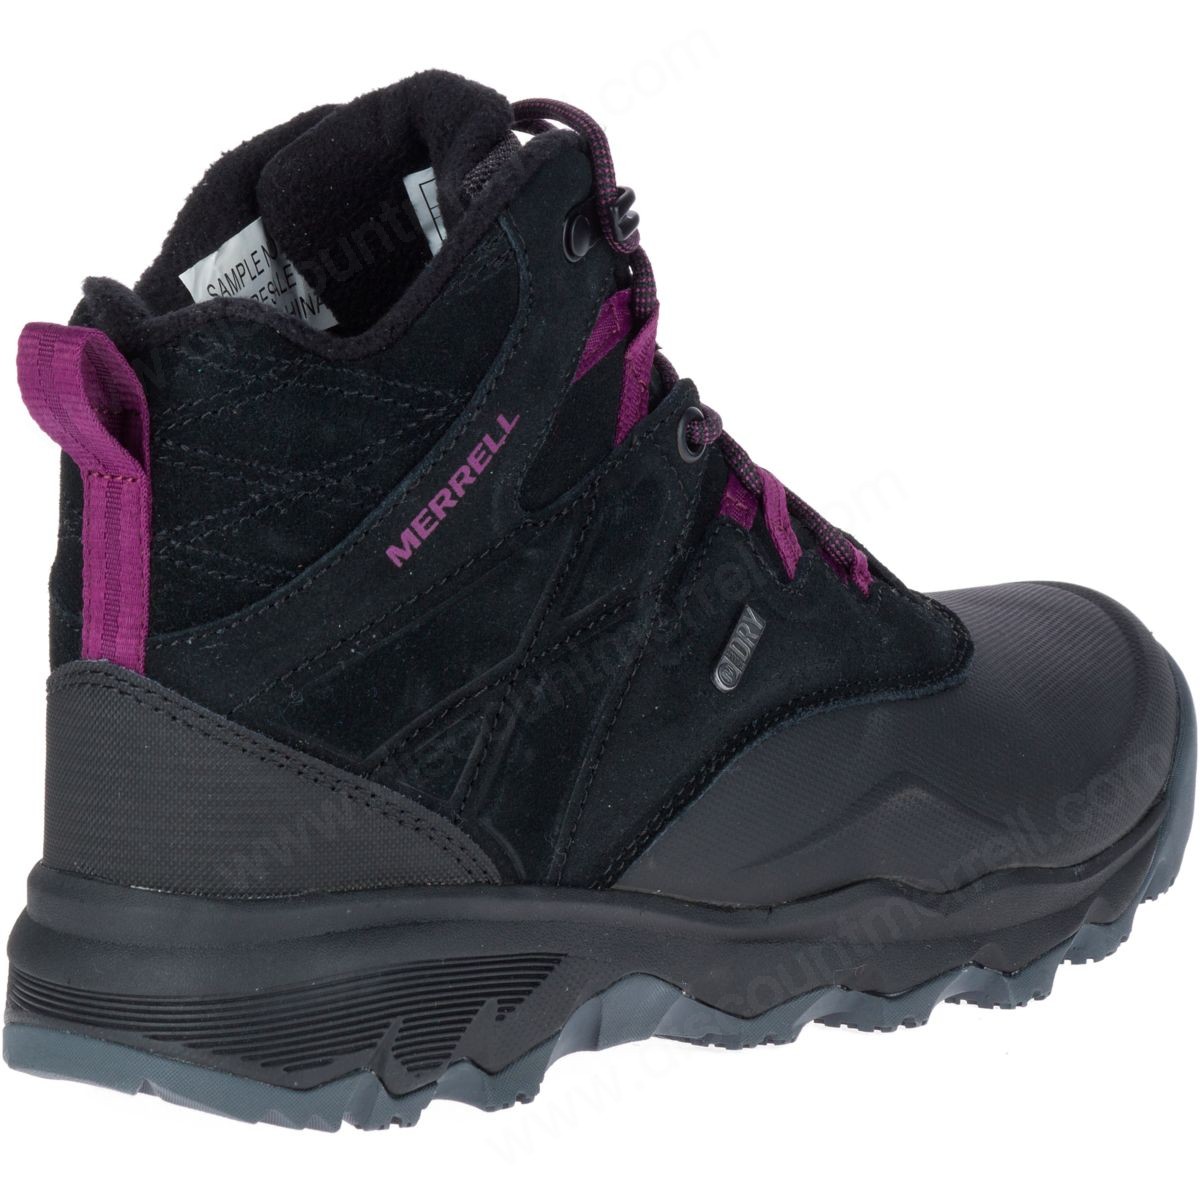 Merrell Lady's Thermo Shiver " Waterproof Black - -7